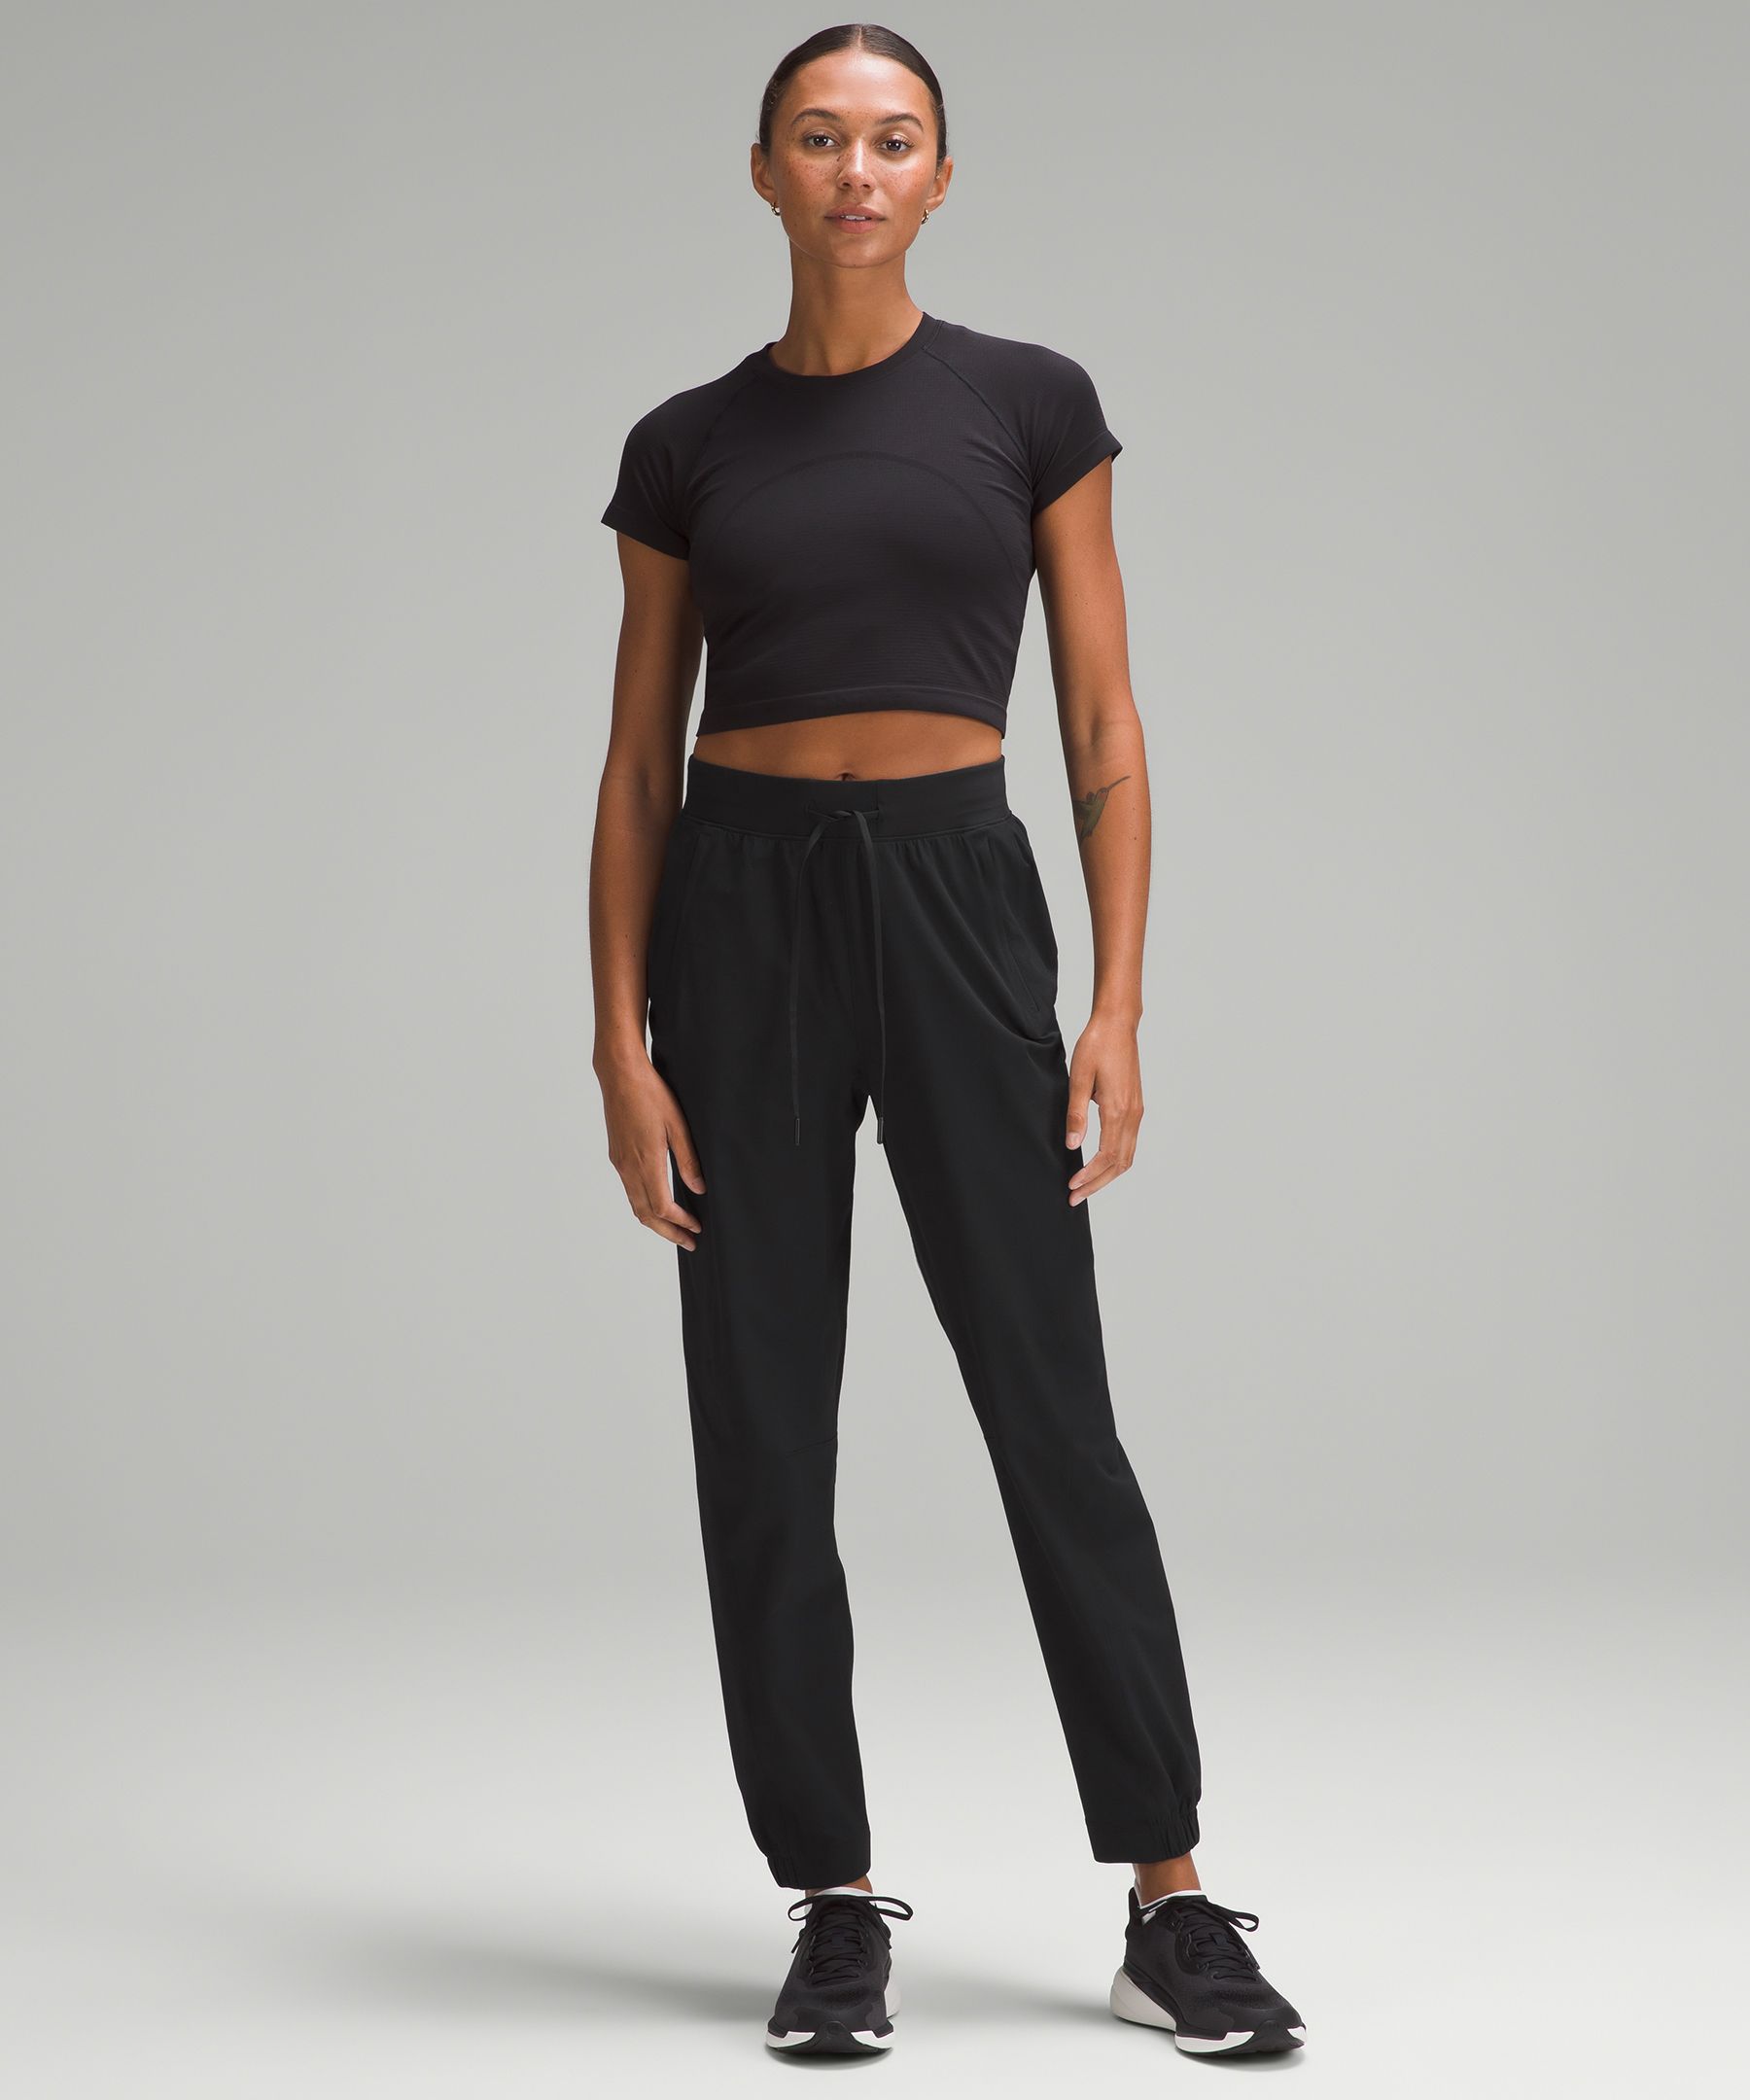 classic fit tee (blk 2) & license to train high rise pant (dark forest 4) :  r/lululemon